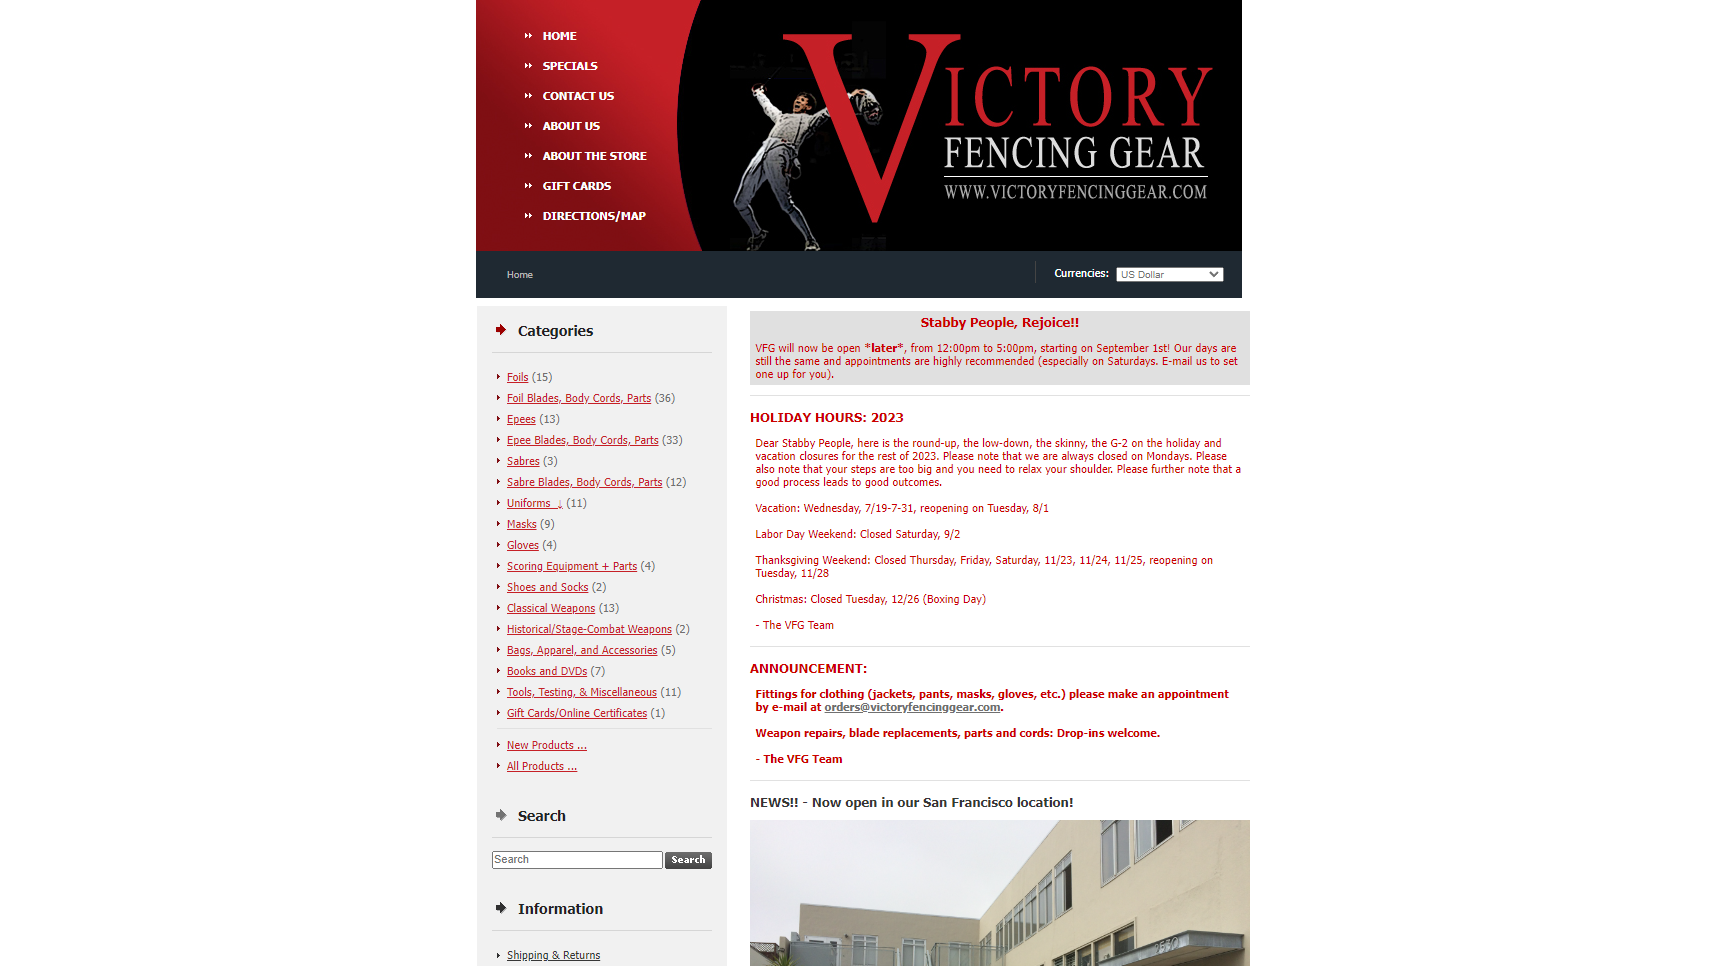 Victory Fencing Gear - Fencing Gear Manufacturer